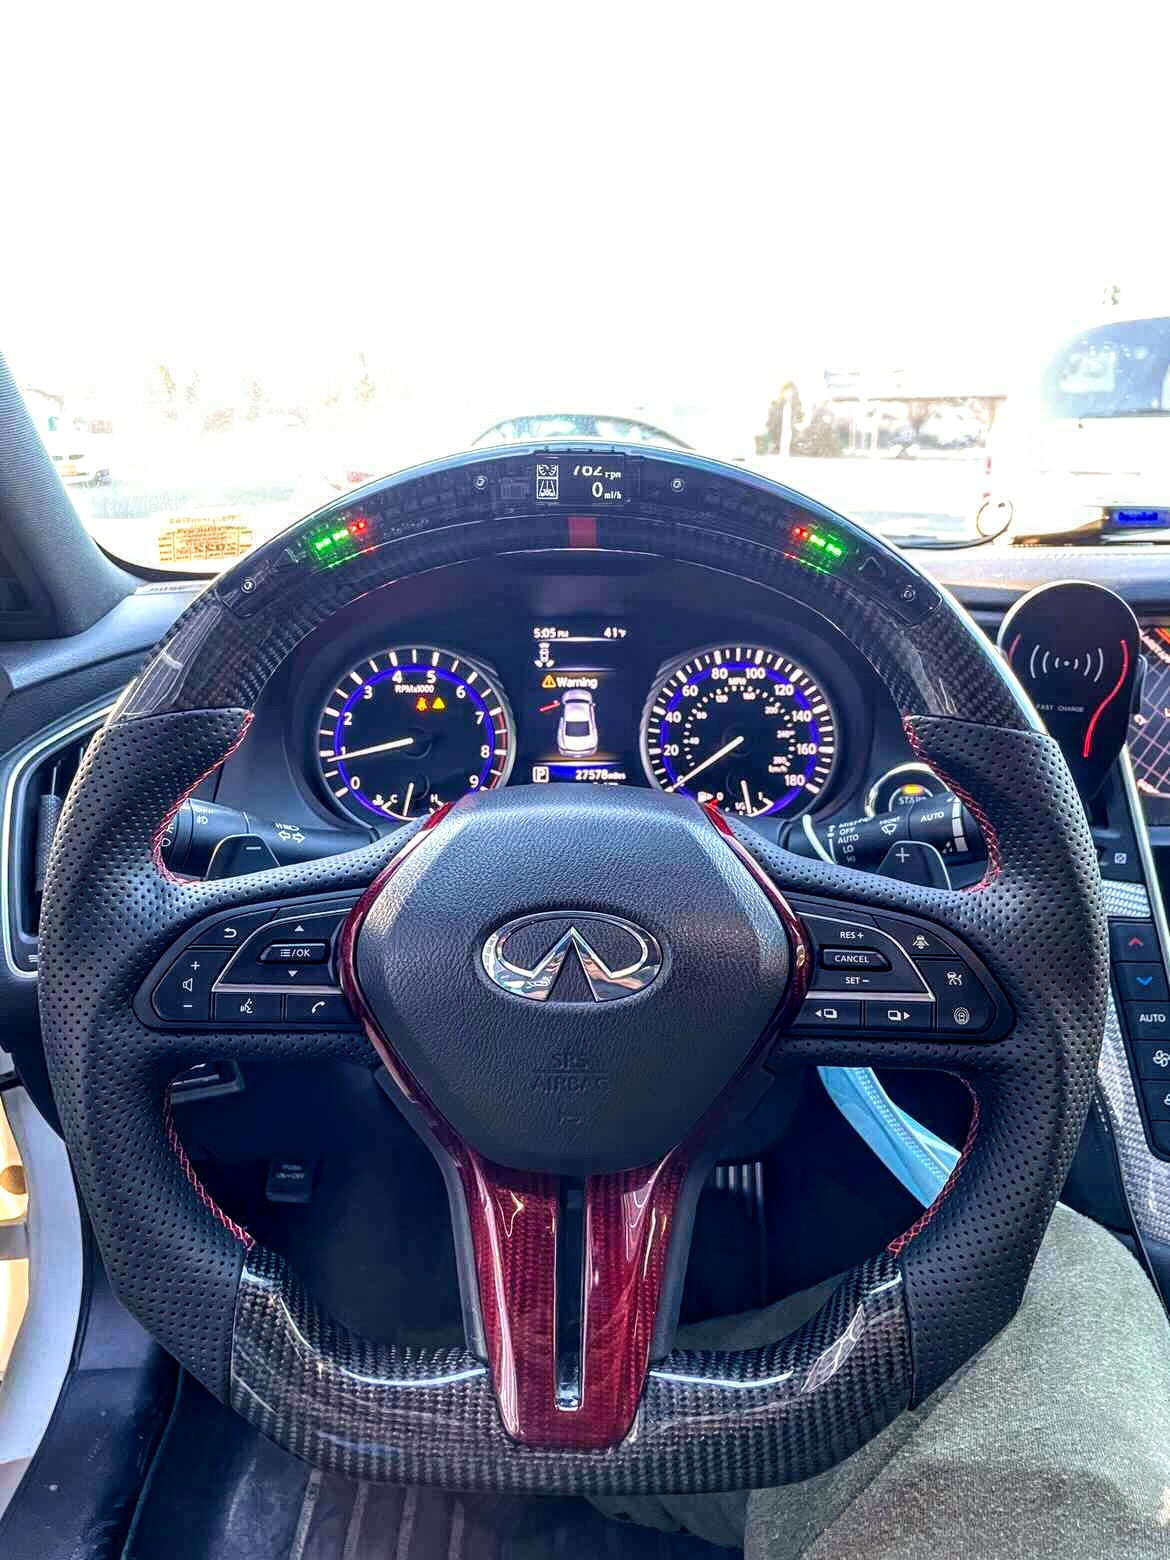 Jalisco's carbon fiber steering wheel with dark red accent, LED indicator, and leather grip for Infiniti Q50/Q60